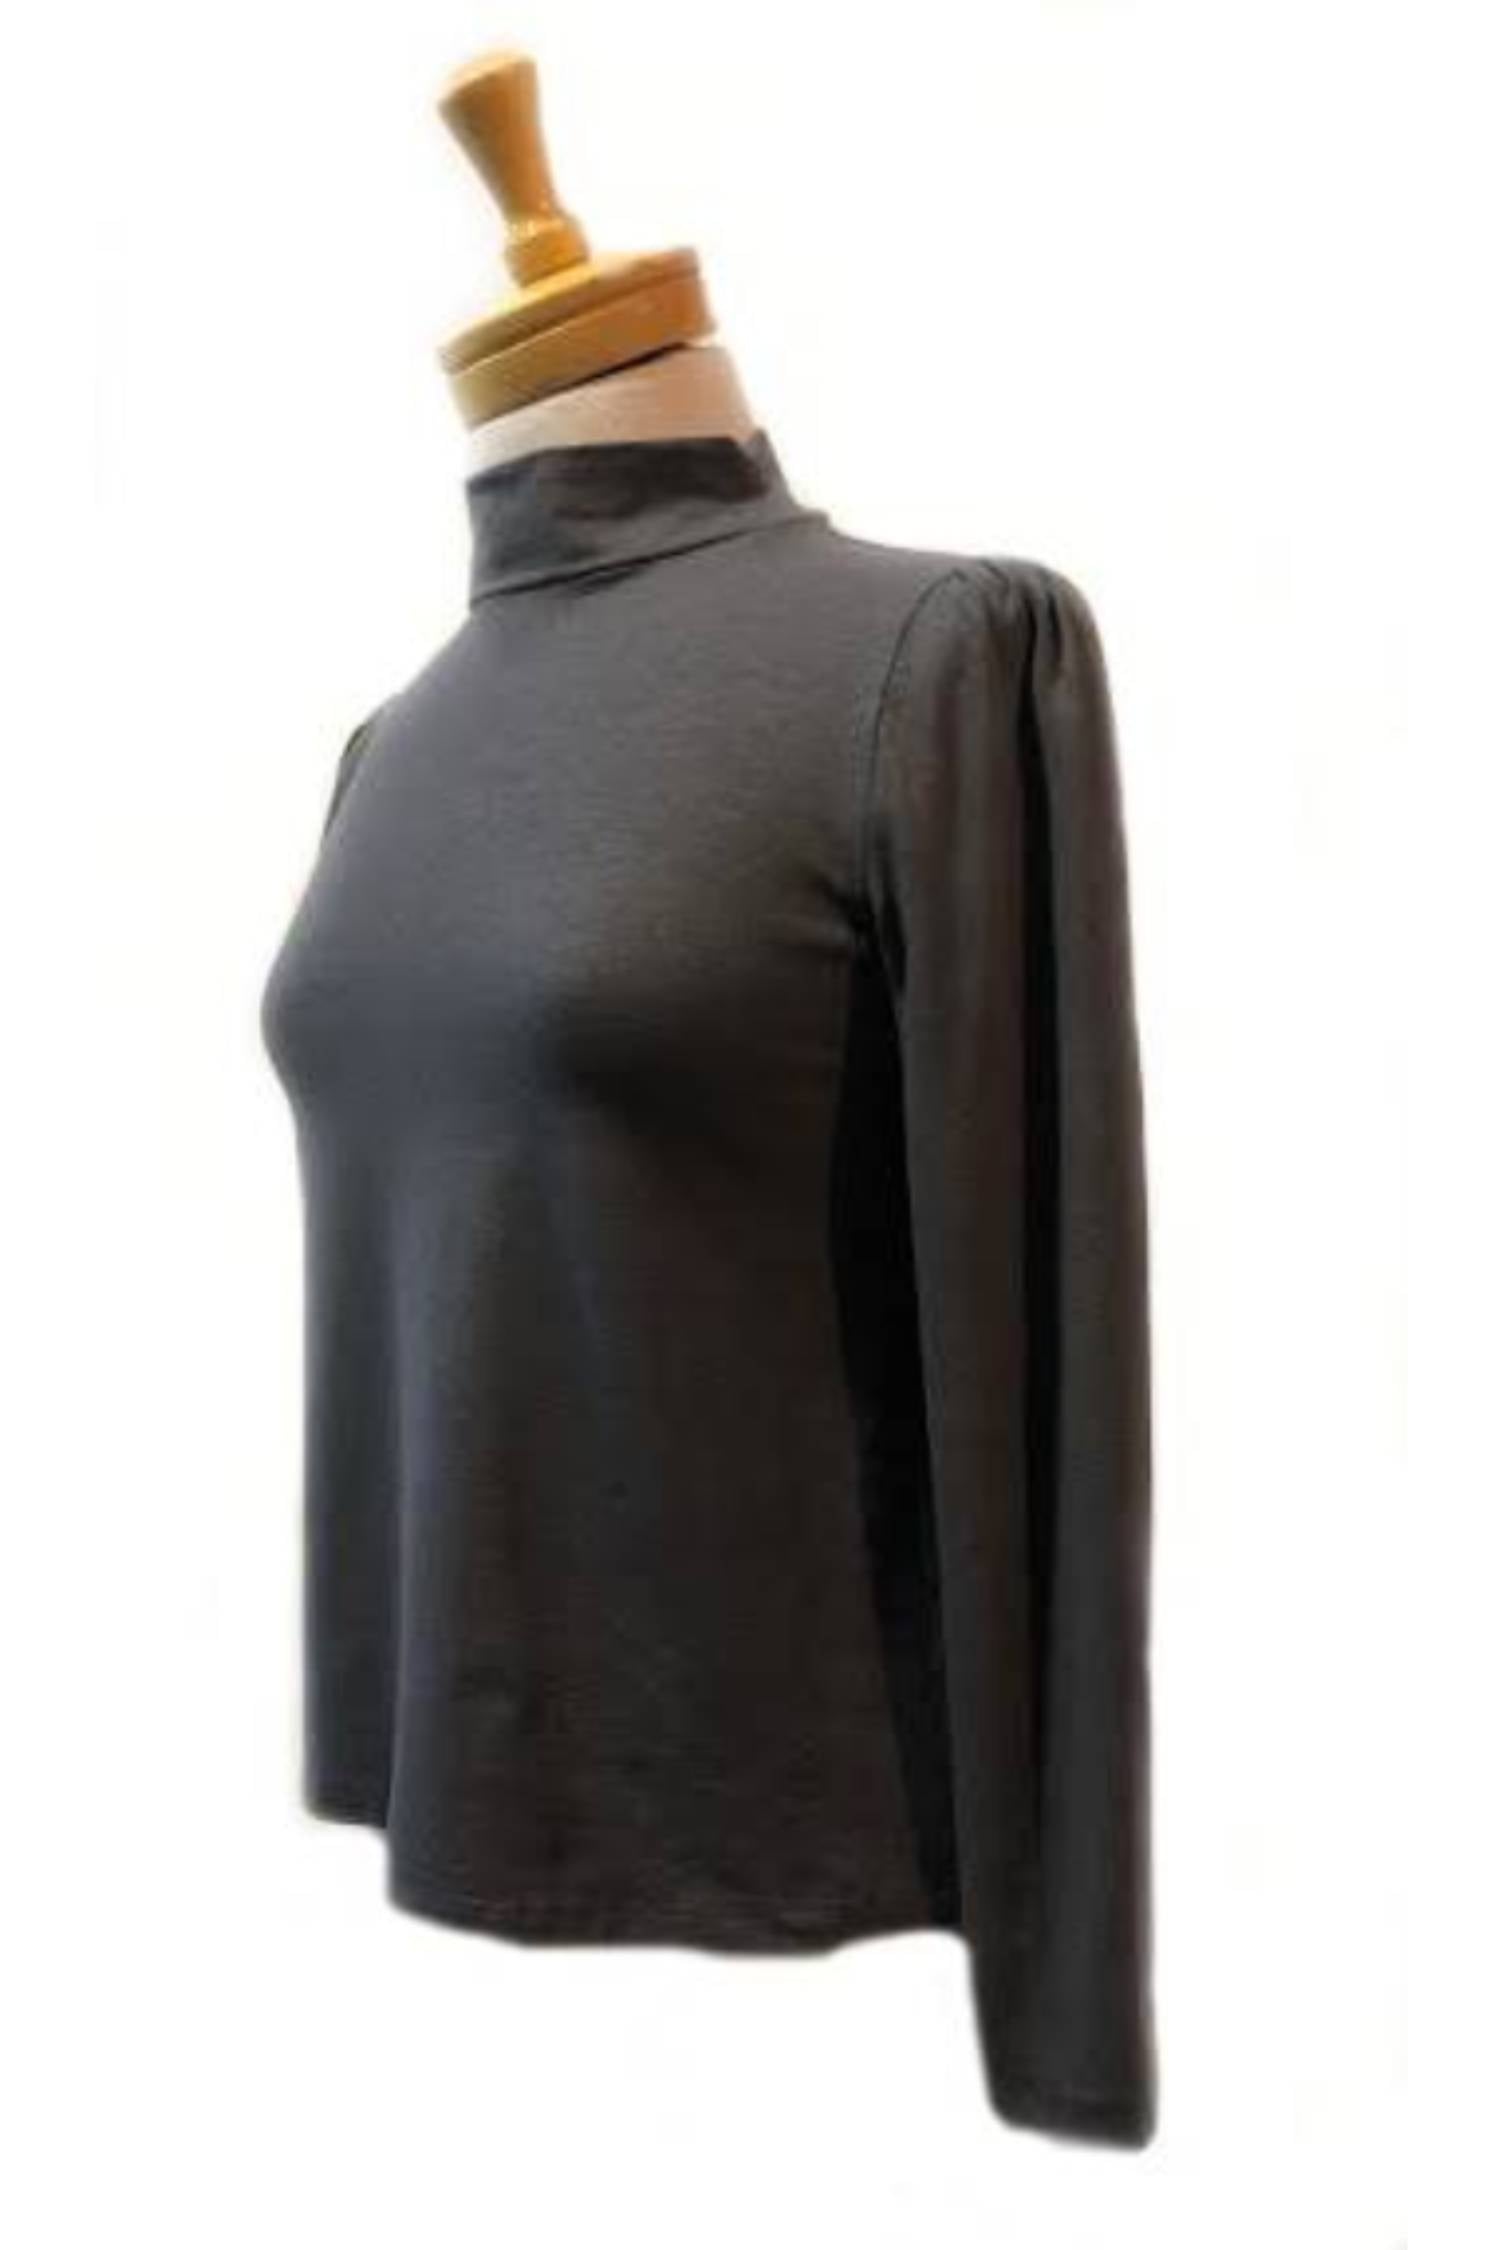 Logan Top by Ramonalisa, Charcoal, front view, mock turtleneck, puffed sleeves, hemp/organic cotton, sizes XS to XL, made in Montreal 